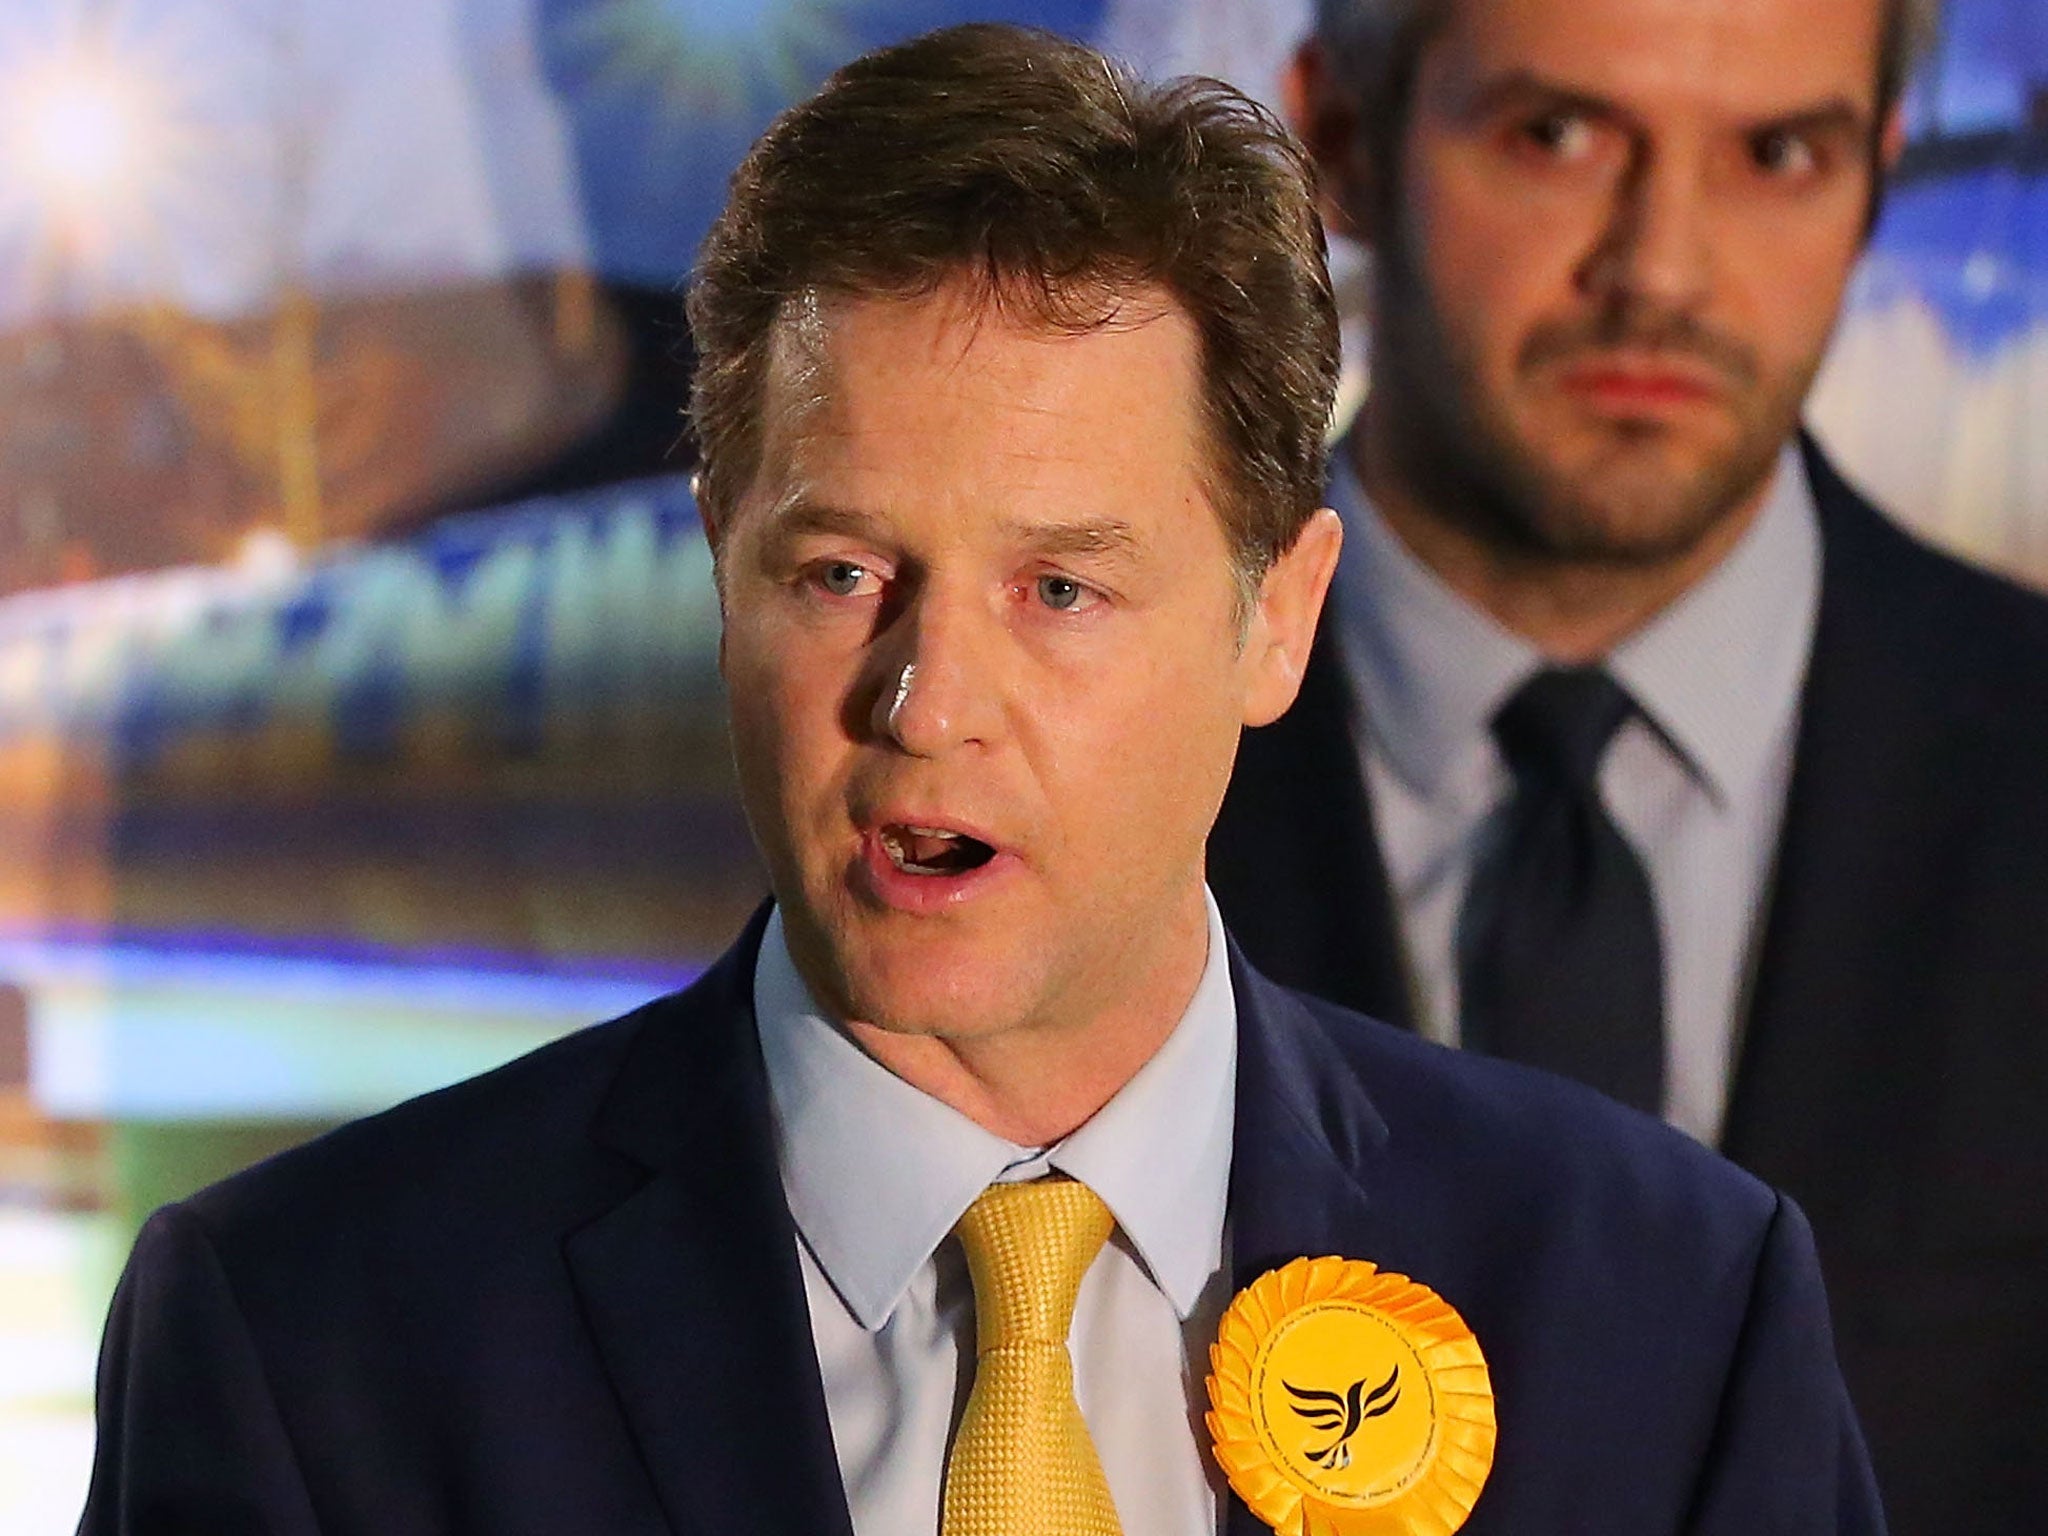 Nick Clegg nominated Anthony Ullmann for a knighthood